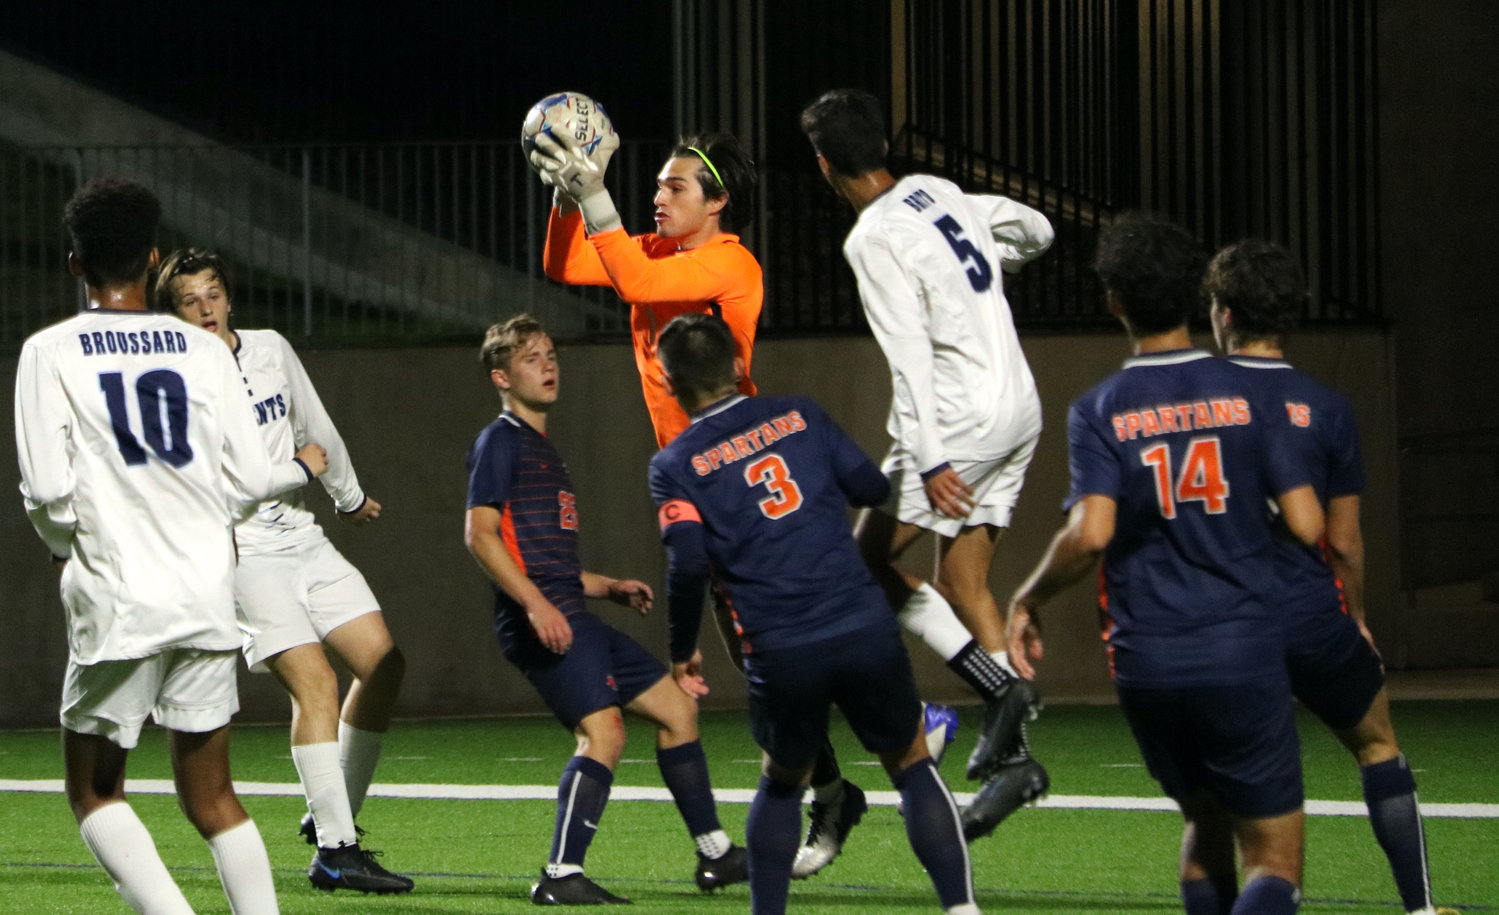 Ben Aviles snags a ball in the box during Thursday’s Class 6A bi-district game between Seven Lakes and Fort Bend Clements at Legacy Stadium.